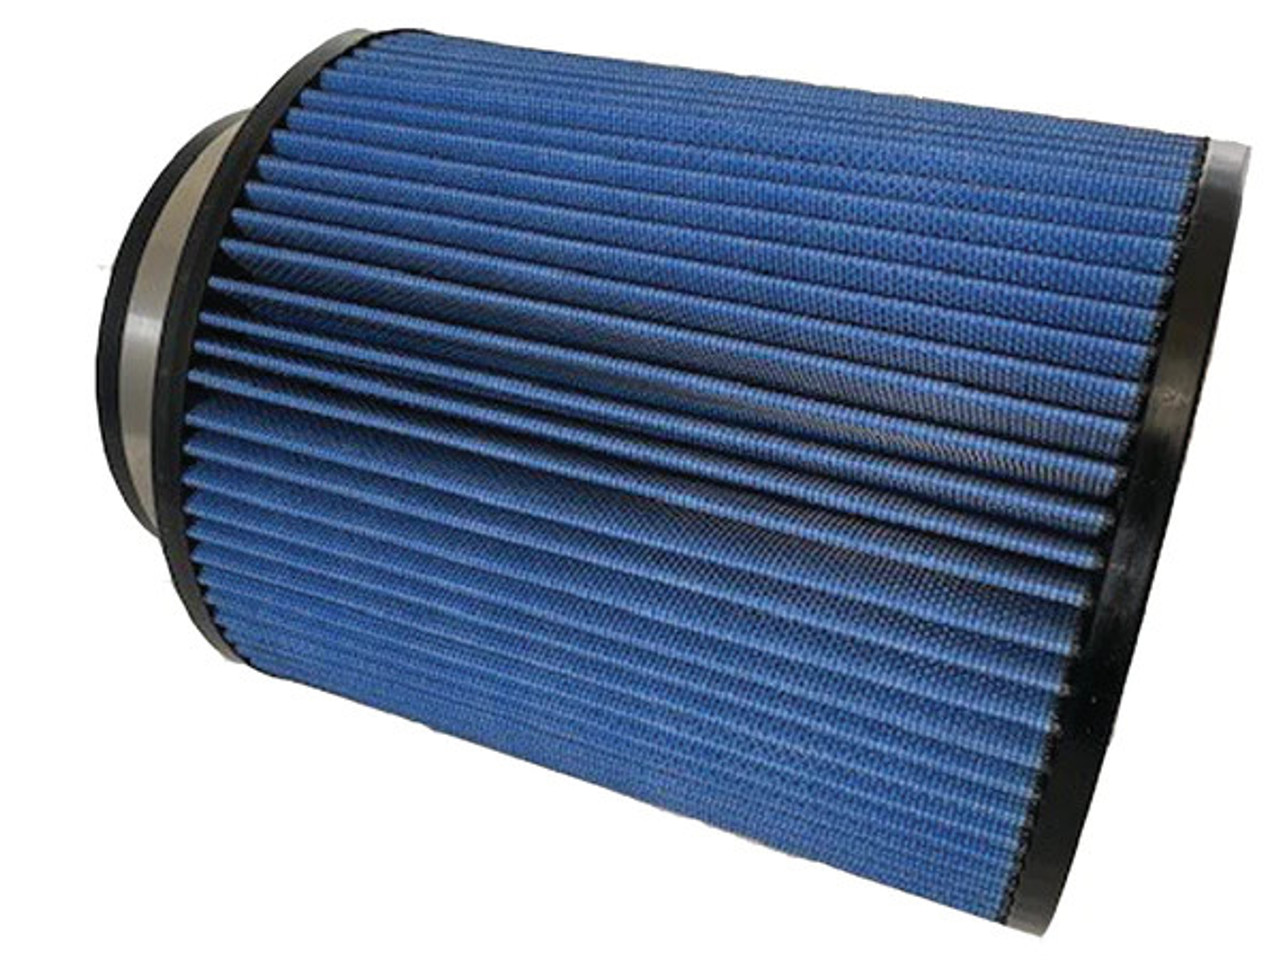 Direct Replacement for Volvo air filter part number 21496510 & Walker 1004937
10.42" Tall x 7.6" Wide x 4.74" Throat